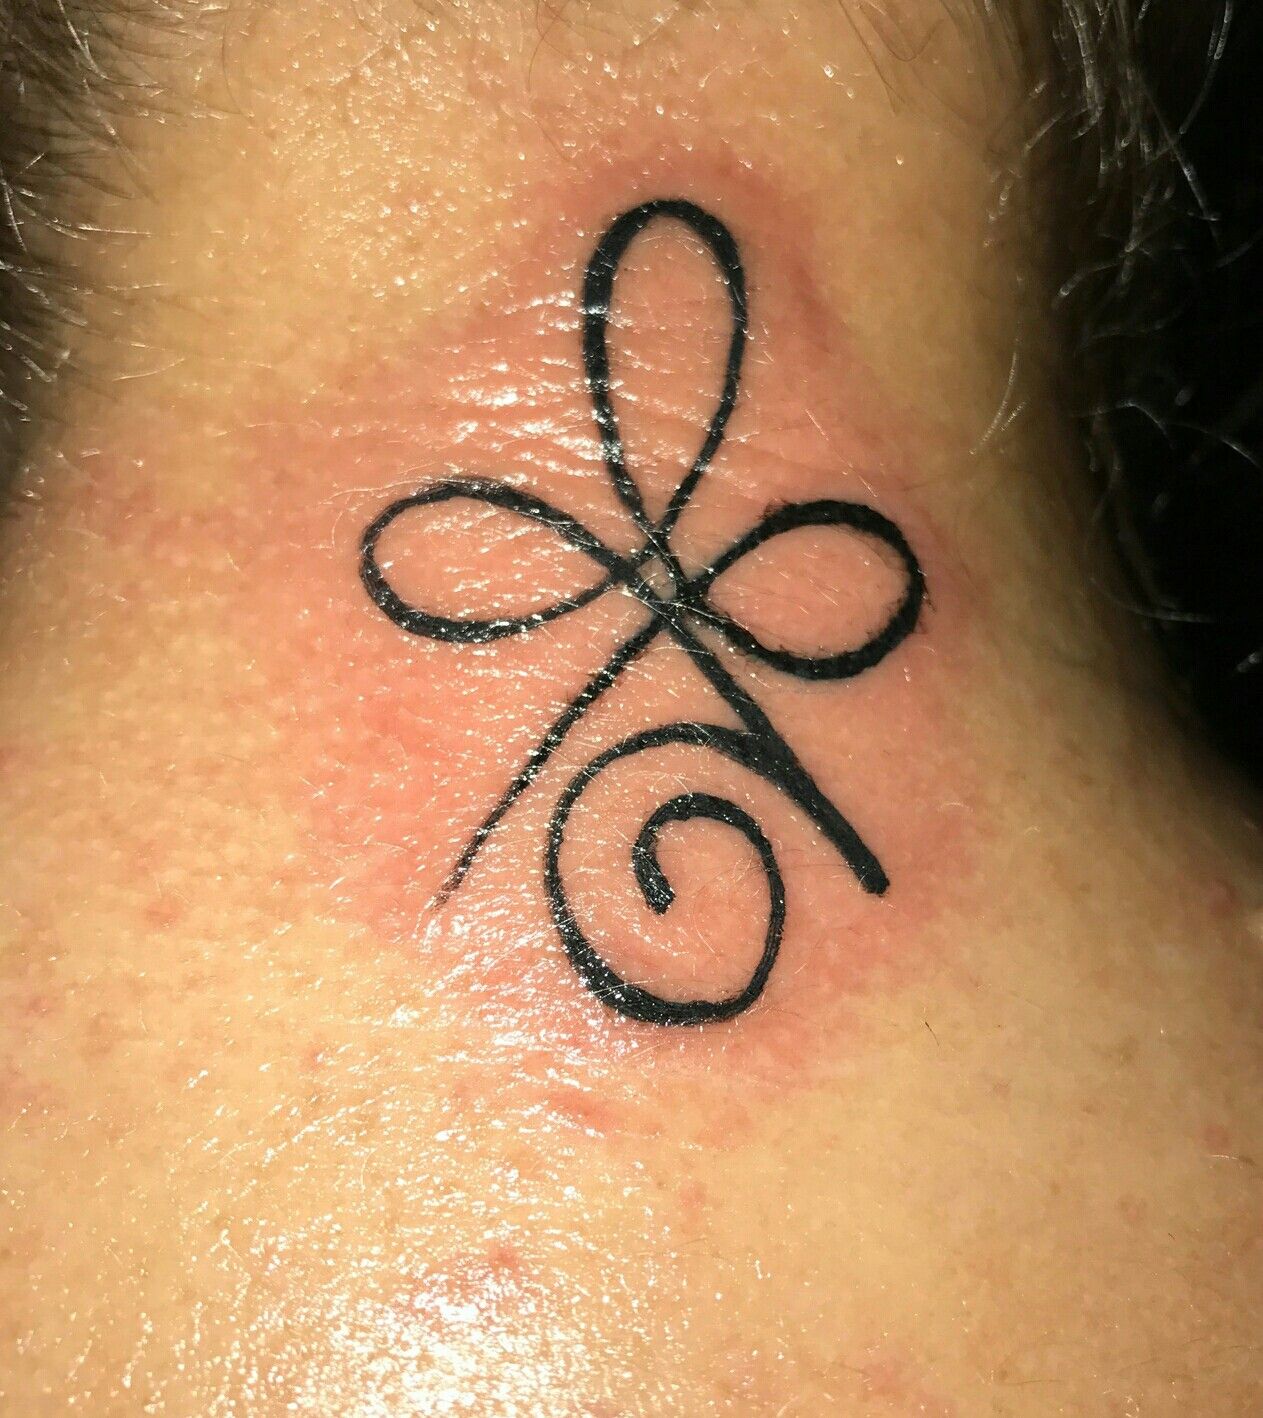 My tattoo #12. Celtic symbol for strength. Perfect for all I’ve been through. Survived. And stronger because of my strength